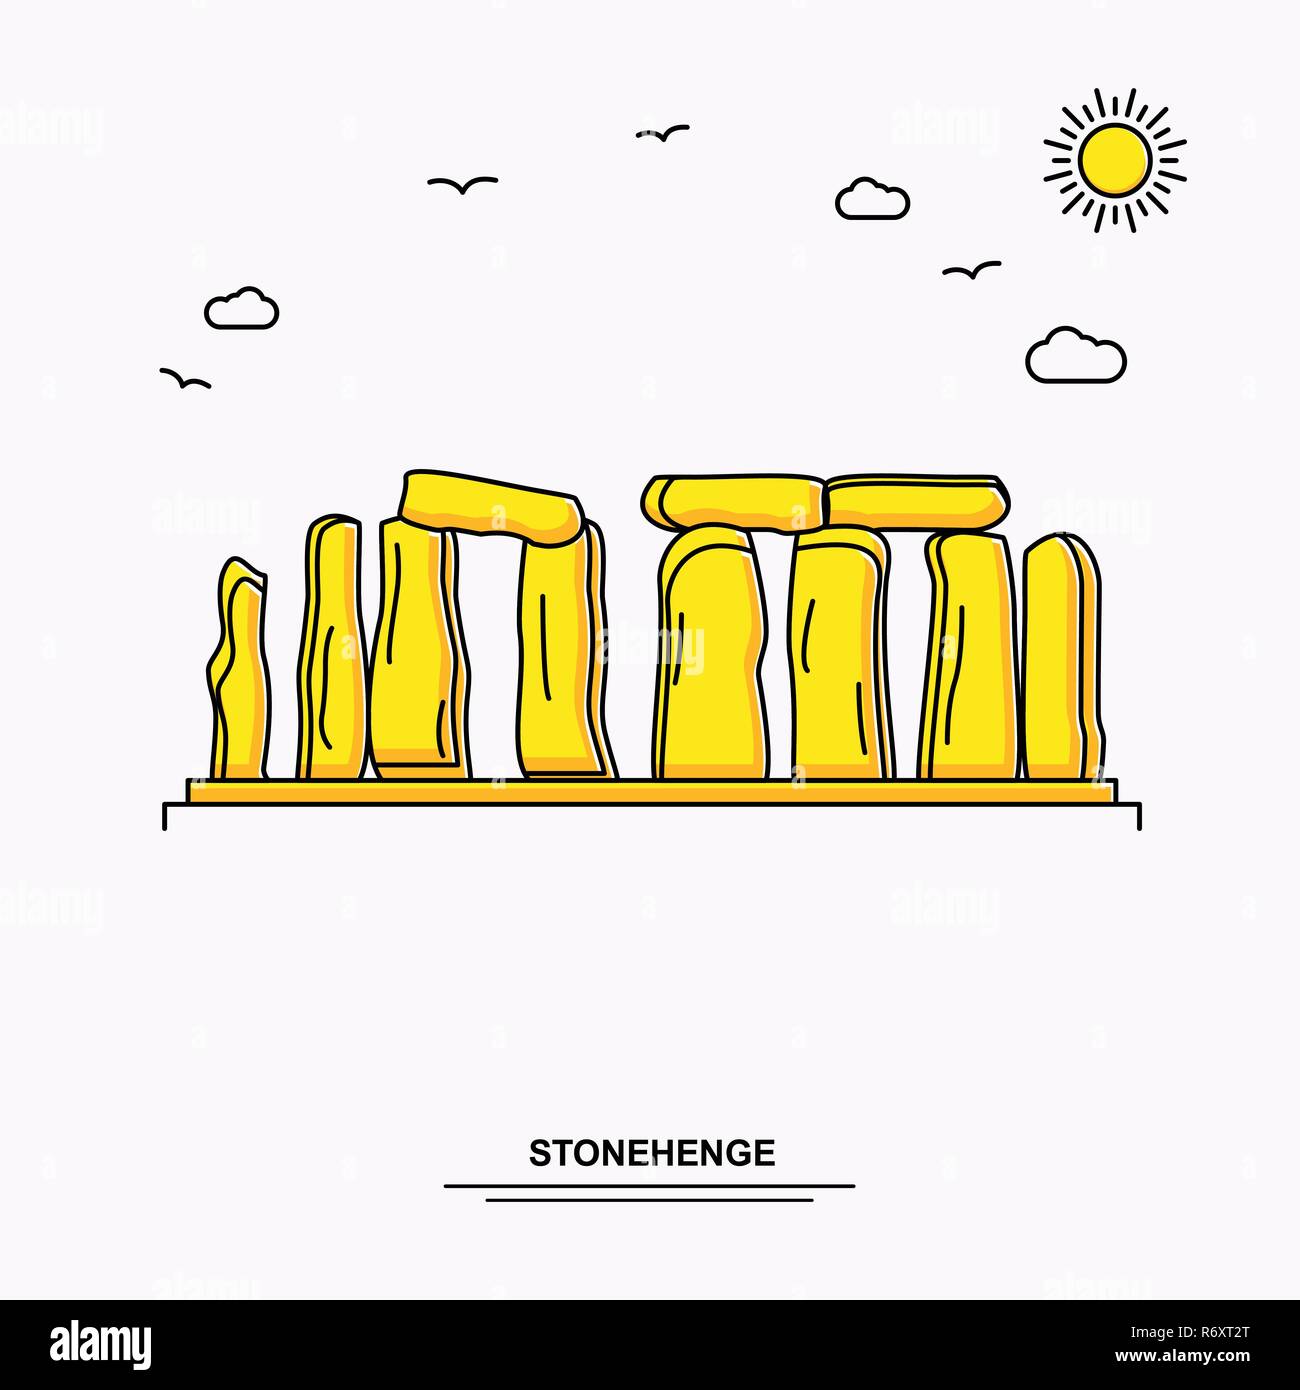 STONEHENGE Monument Poster Template. World Travel Yellow illustration Background in Line Style with beauture nature Scene Stock Vector